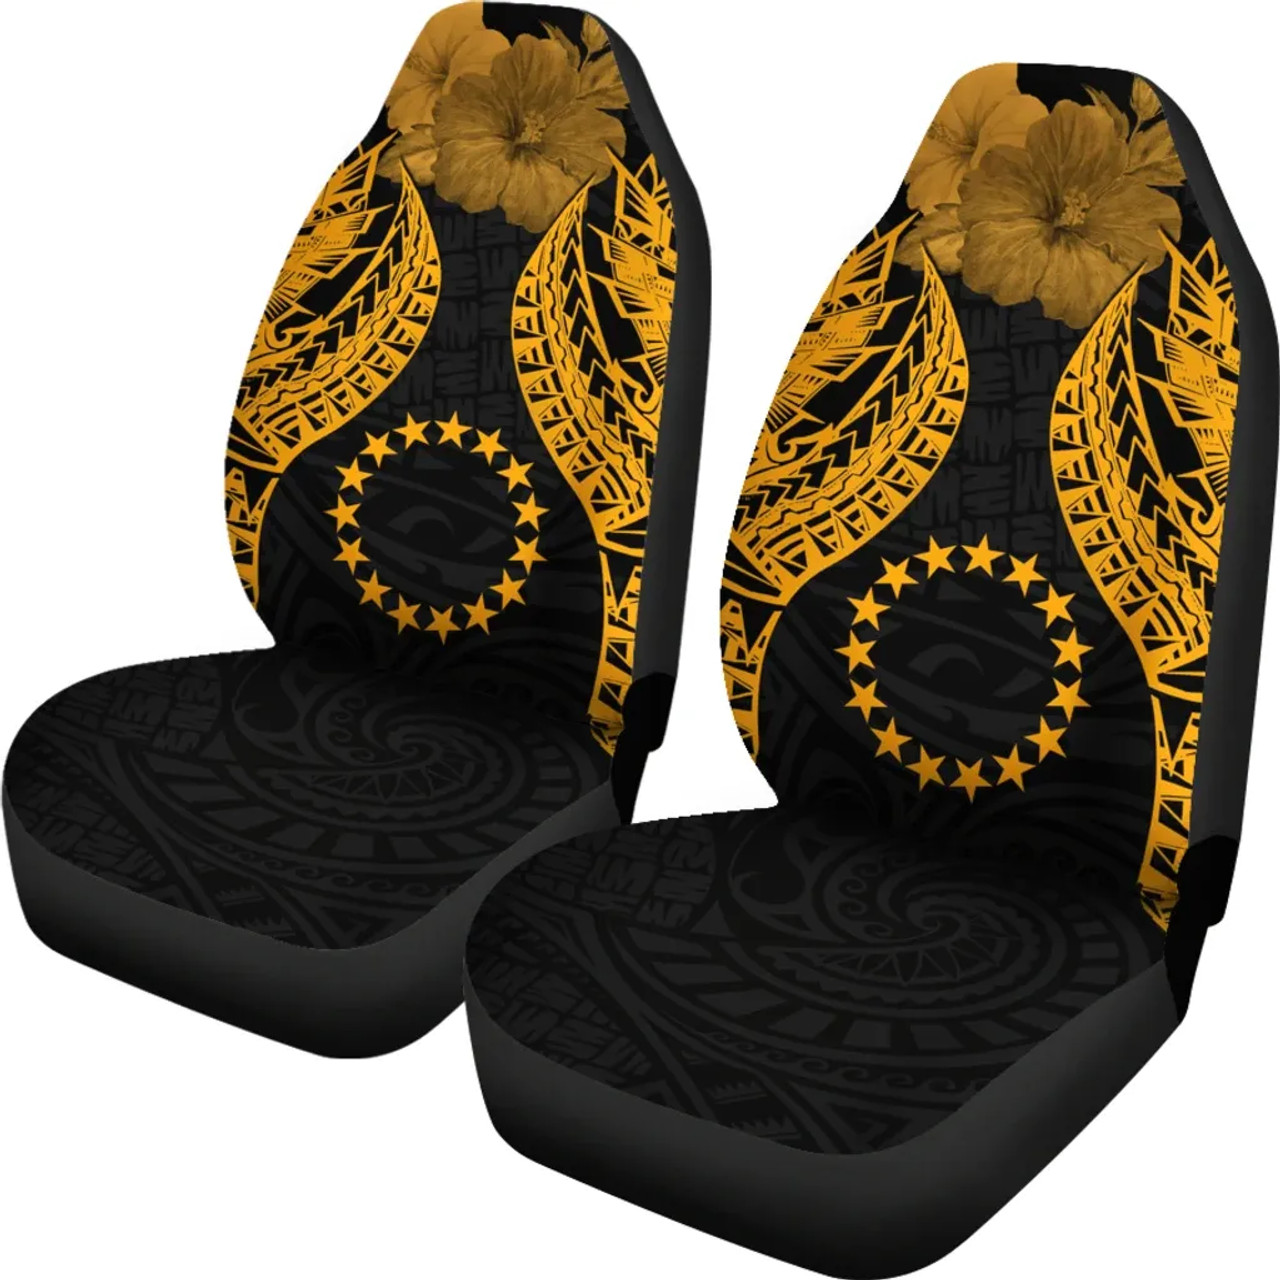 Cook islands Polynesian Car Seat Covers Pride Seal And Hibiscus Gold